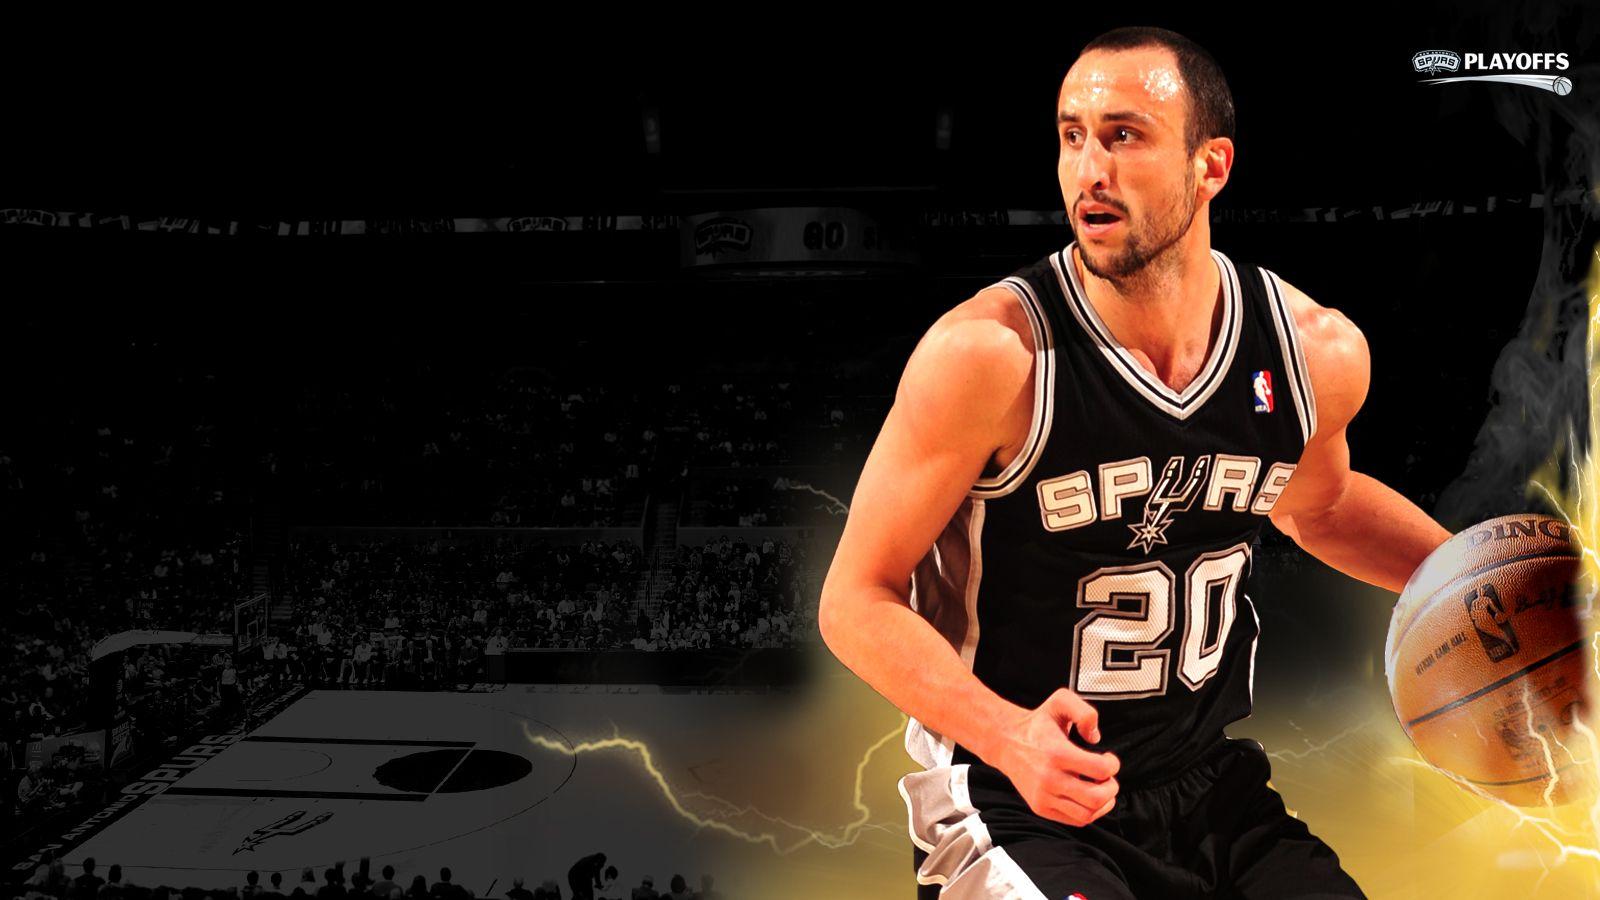 Desktop Playoff Wallpaper. THE OFFICIAL SITE OF THE SAN ANTONIO